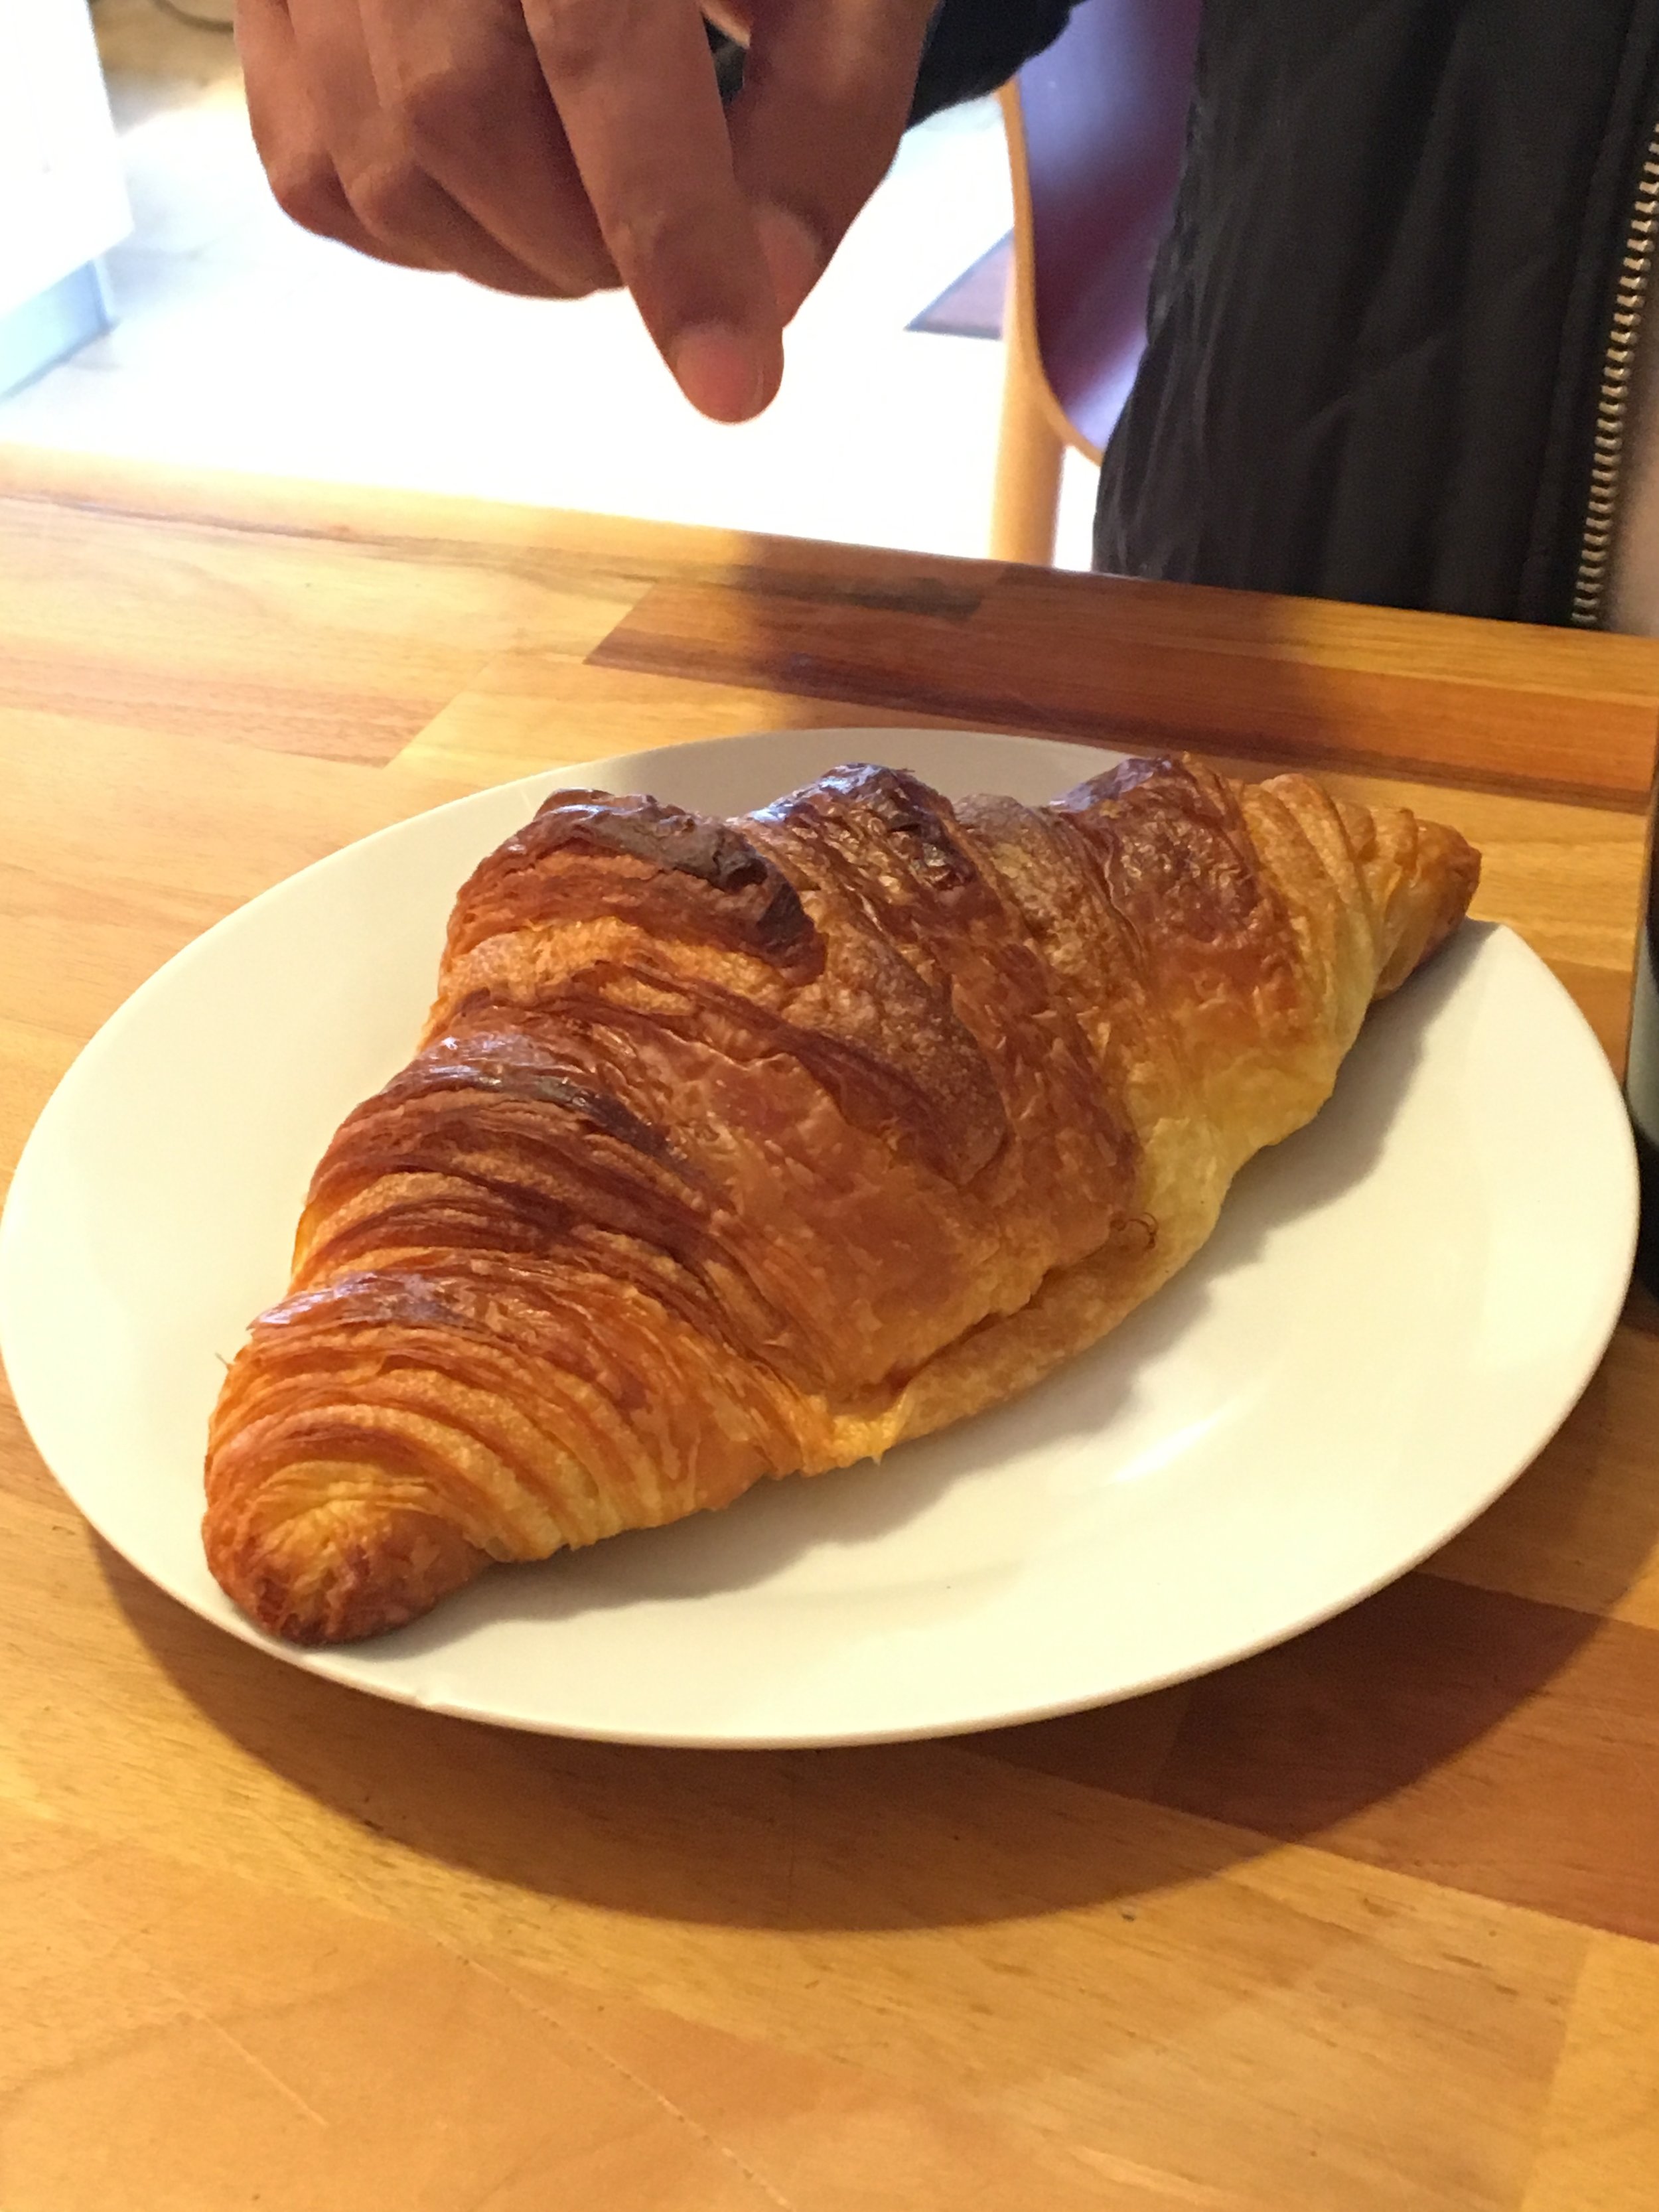  The purest test for a bakery is a plain butter croissant. 